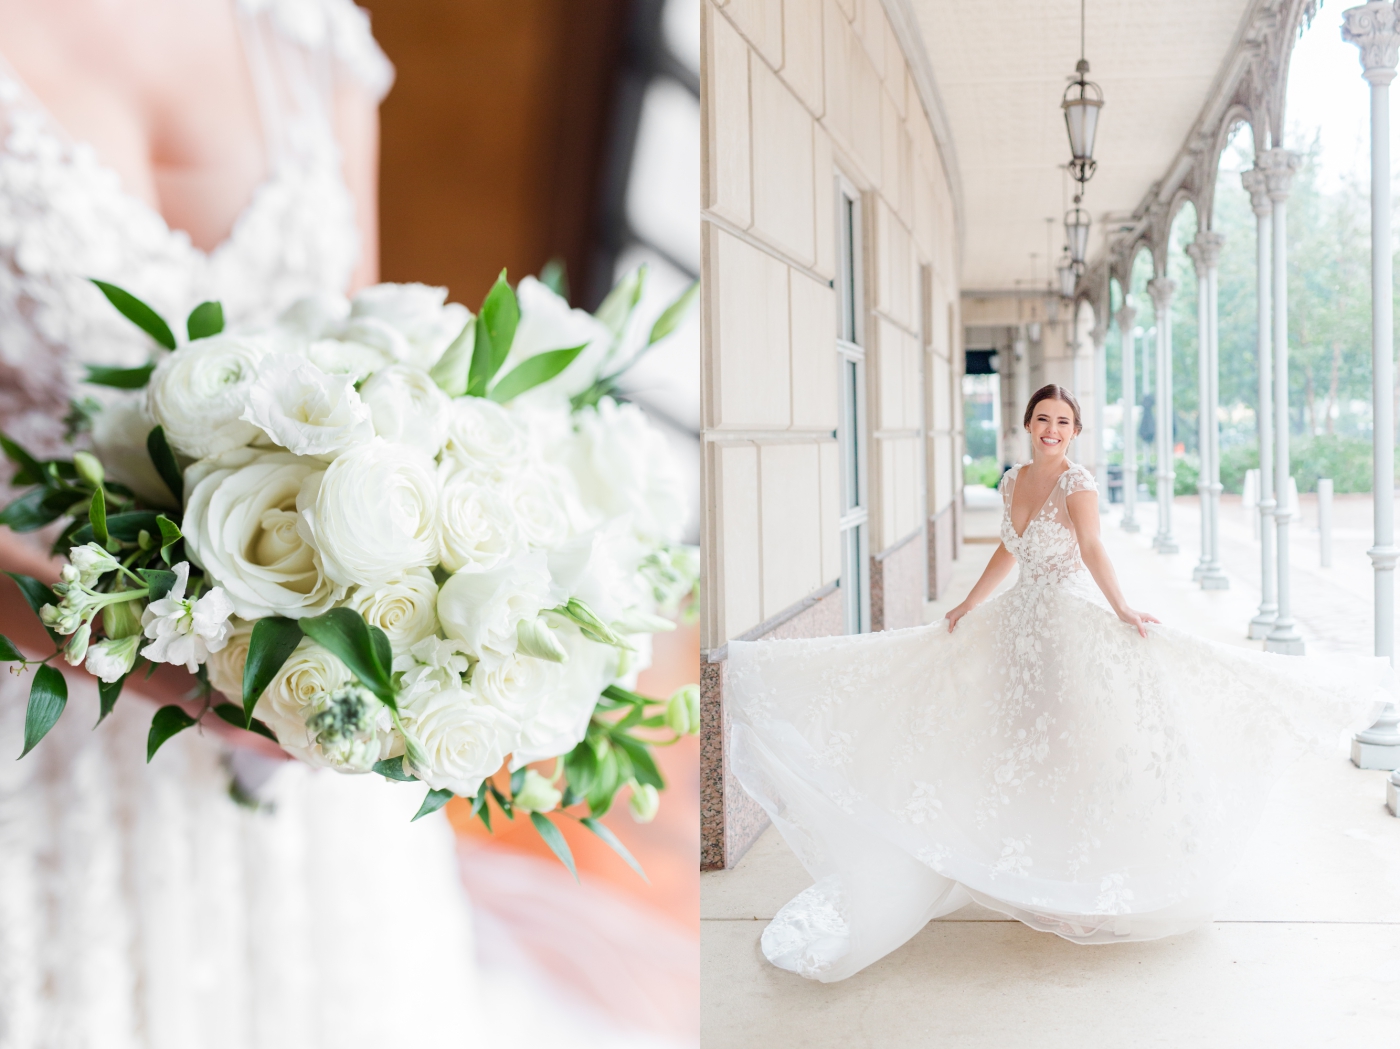 Bride in a Berta gown with white bridal bouquet